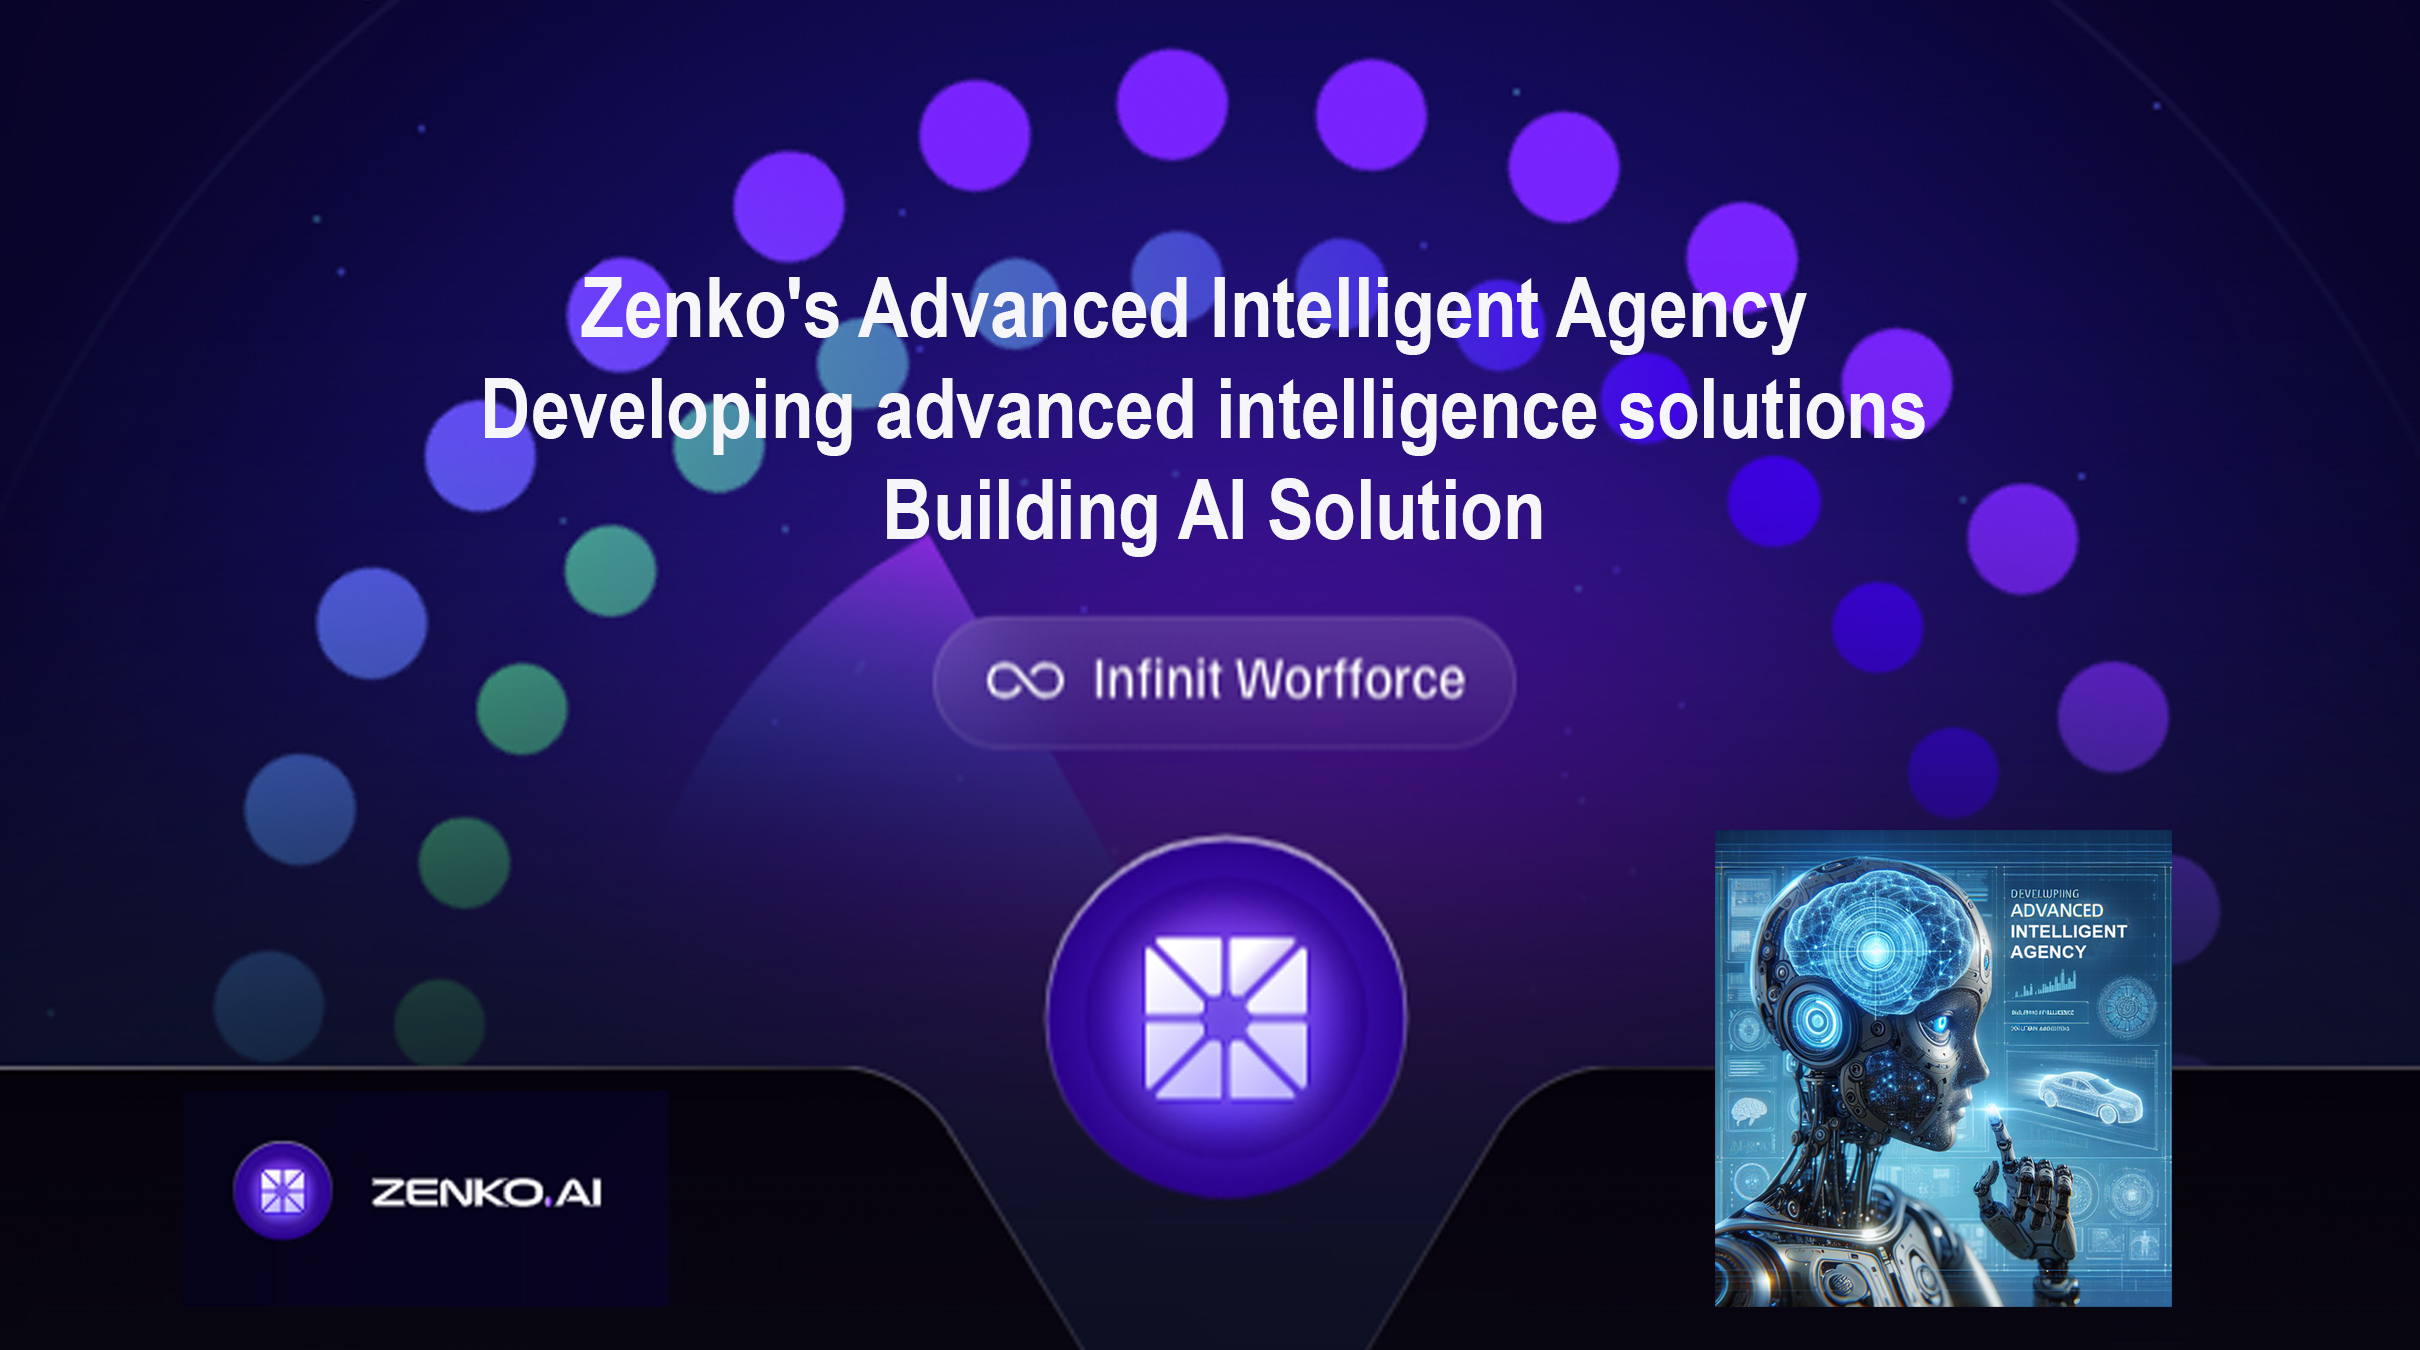 AFRICA-VOGUE-COVER-Zenko's-Advanced-Intelligent-Agency-Developing-advanced-intelligence-solutions-Building-AI-Solution-DN-AFRICA-Media-Partner